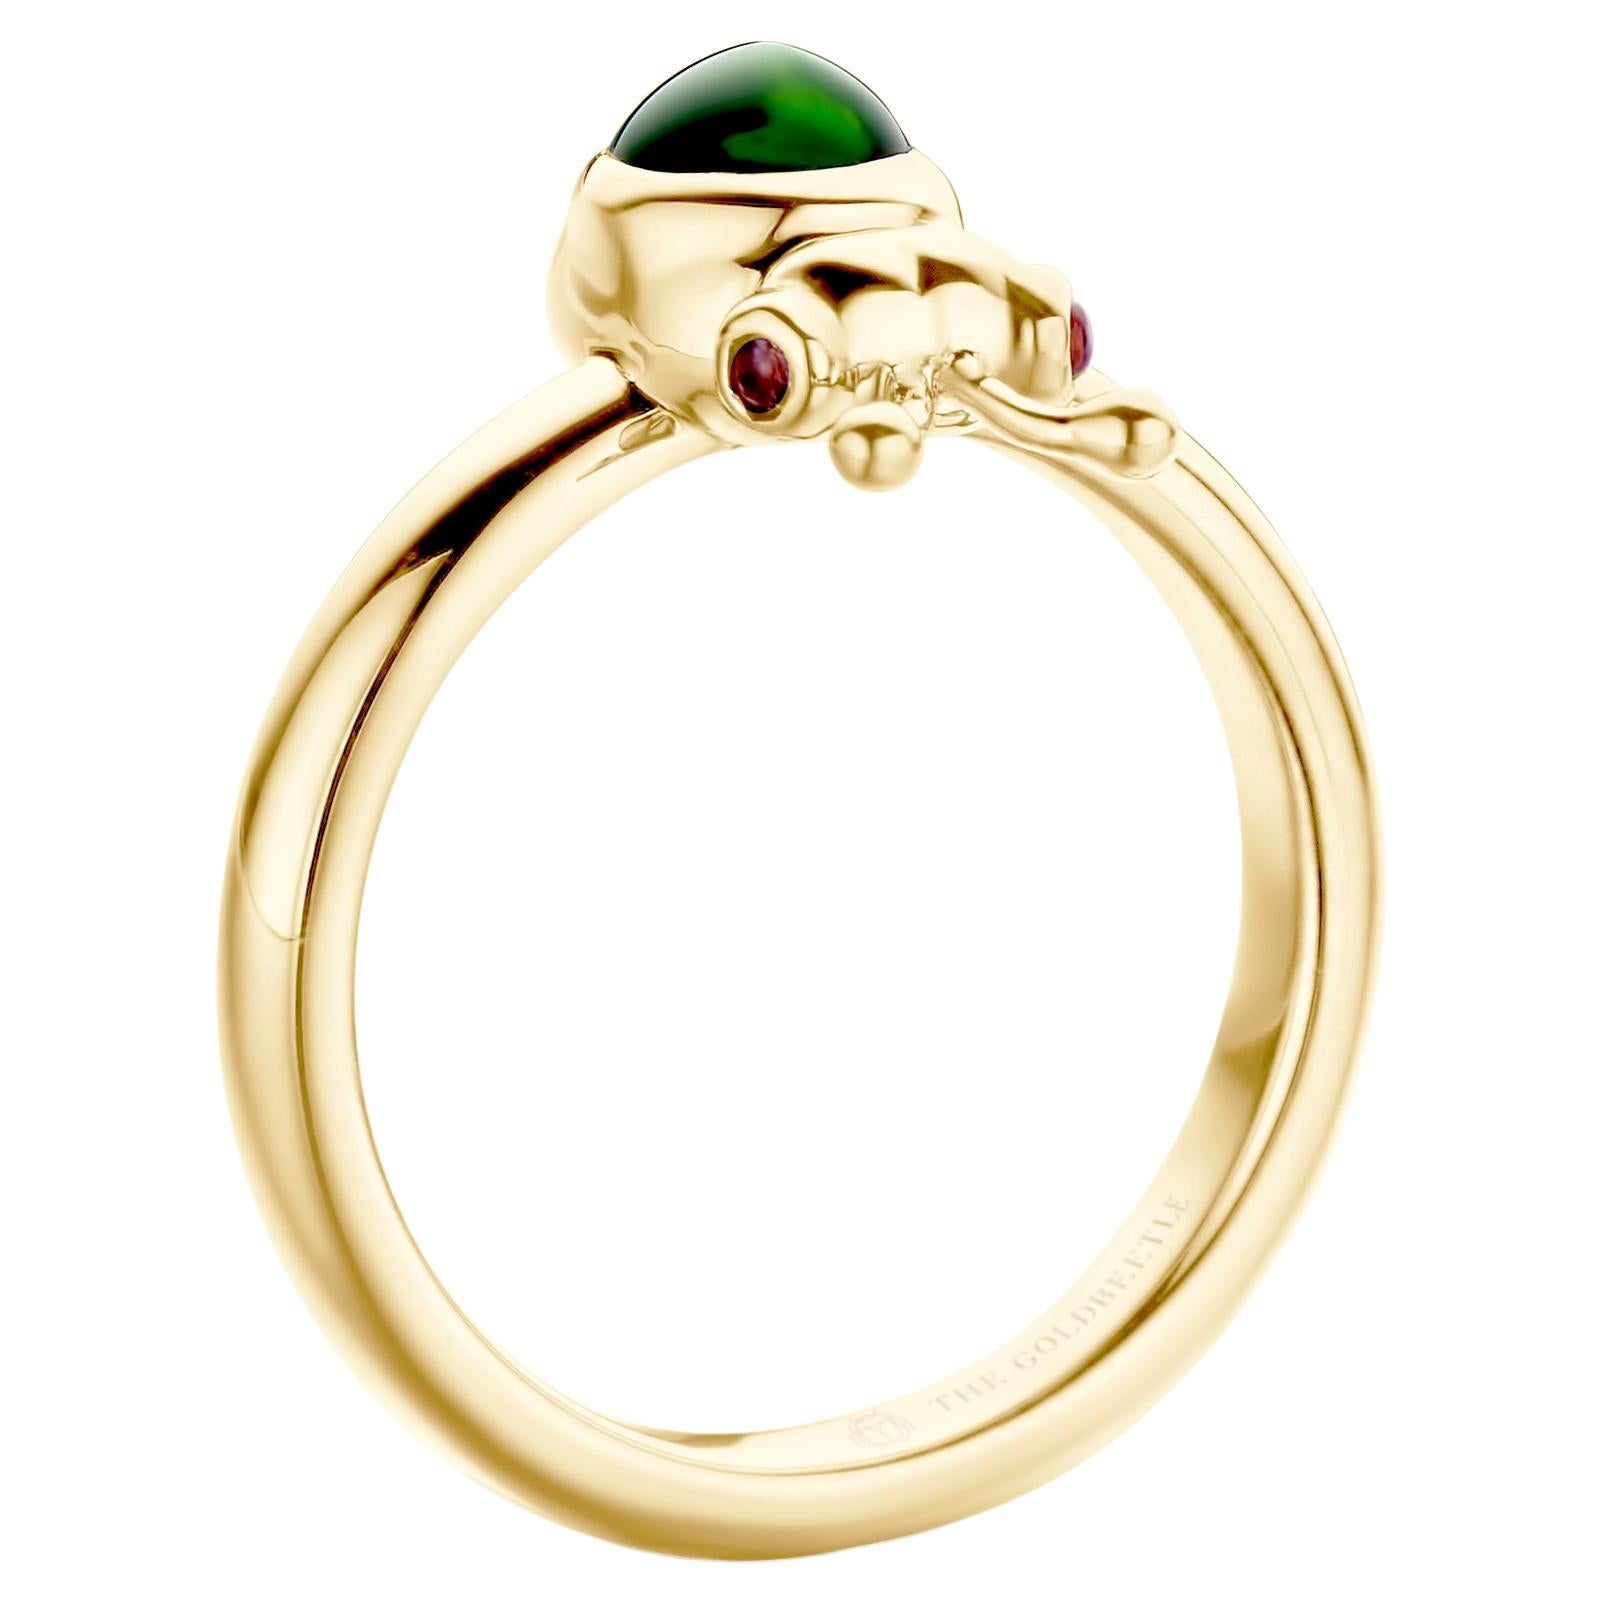 18-karat yellow gold Lilou ring set with one natural pear-shaped cabochon Green Tourmaline and two natural Pink Tourmalines in round cabochon cut.
Celine Roelens, a goldsmith and gemologist, specializes in unique, fine jewelry, handmade in Belgium